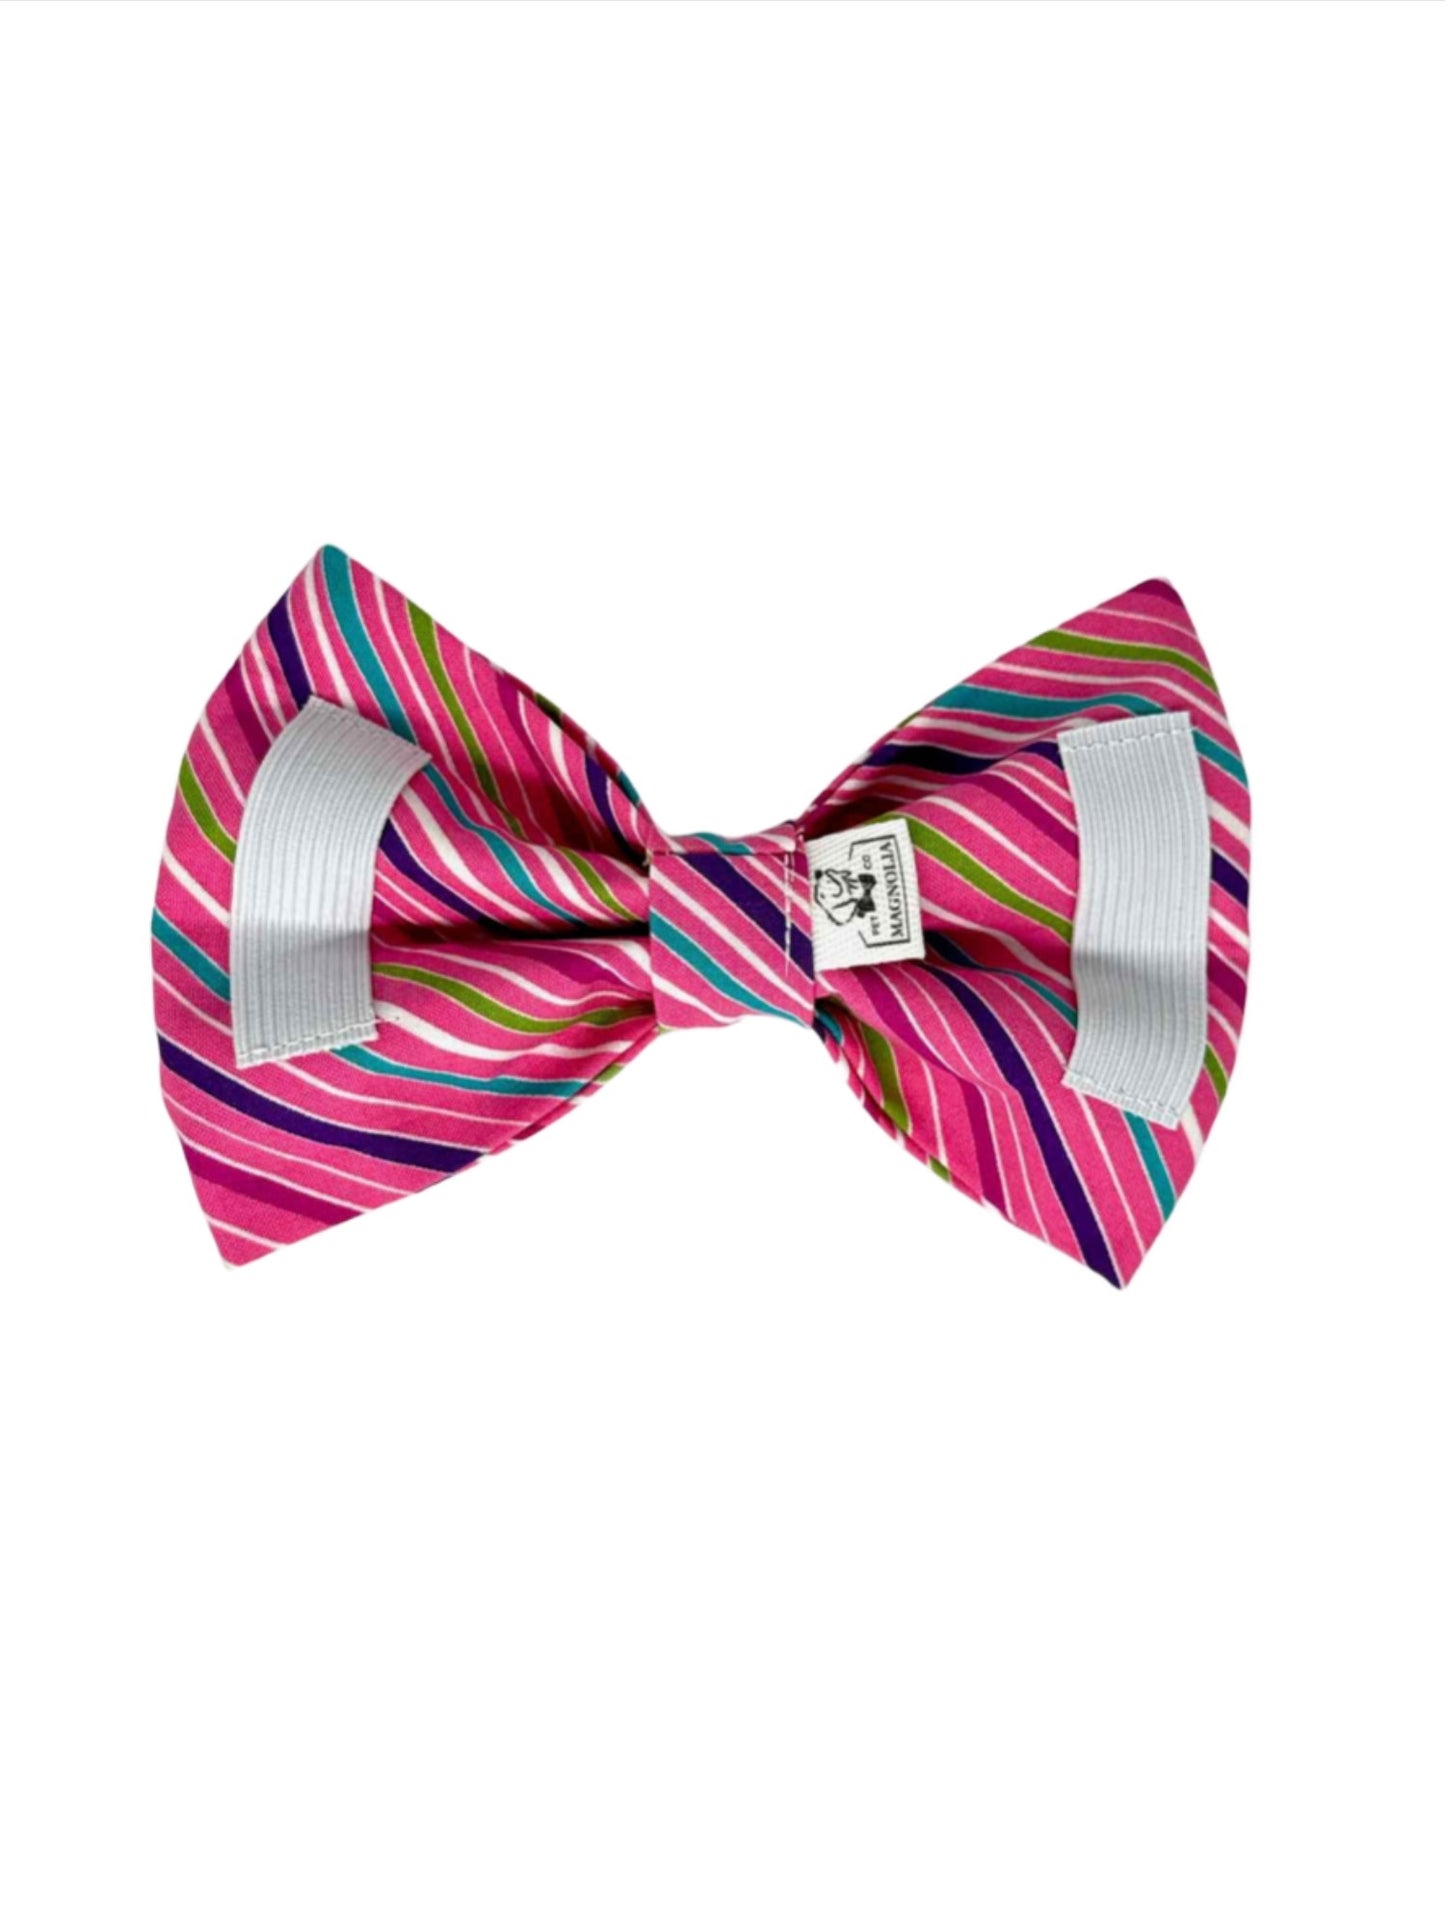 Candy Stripes Bow Tie